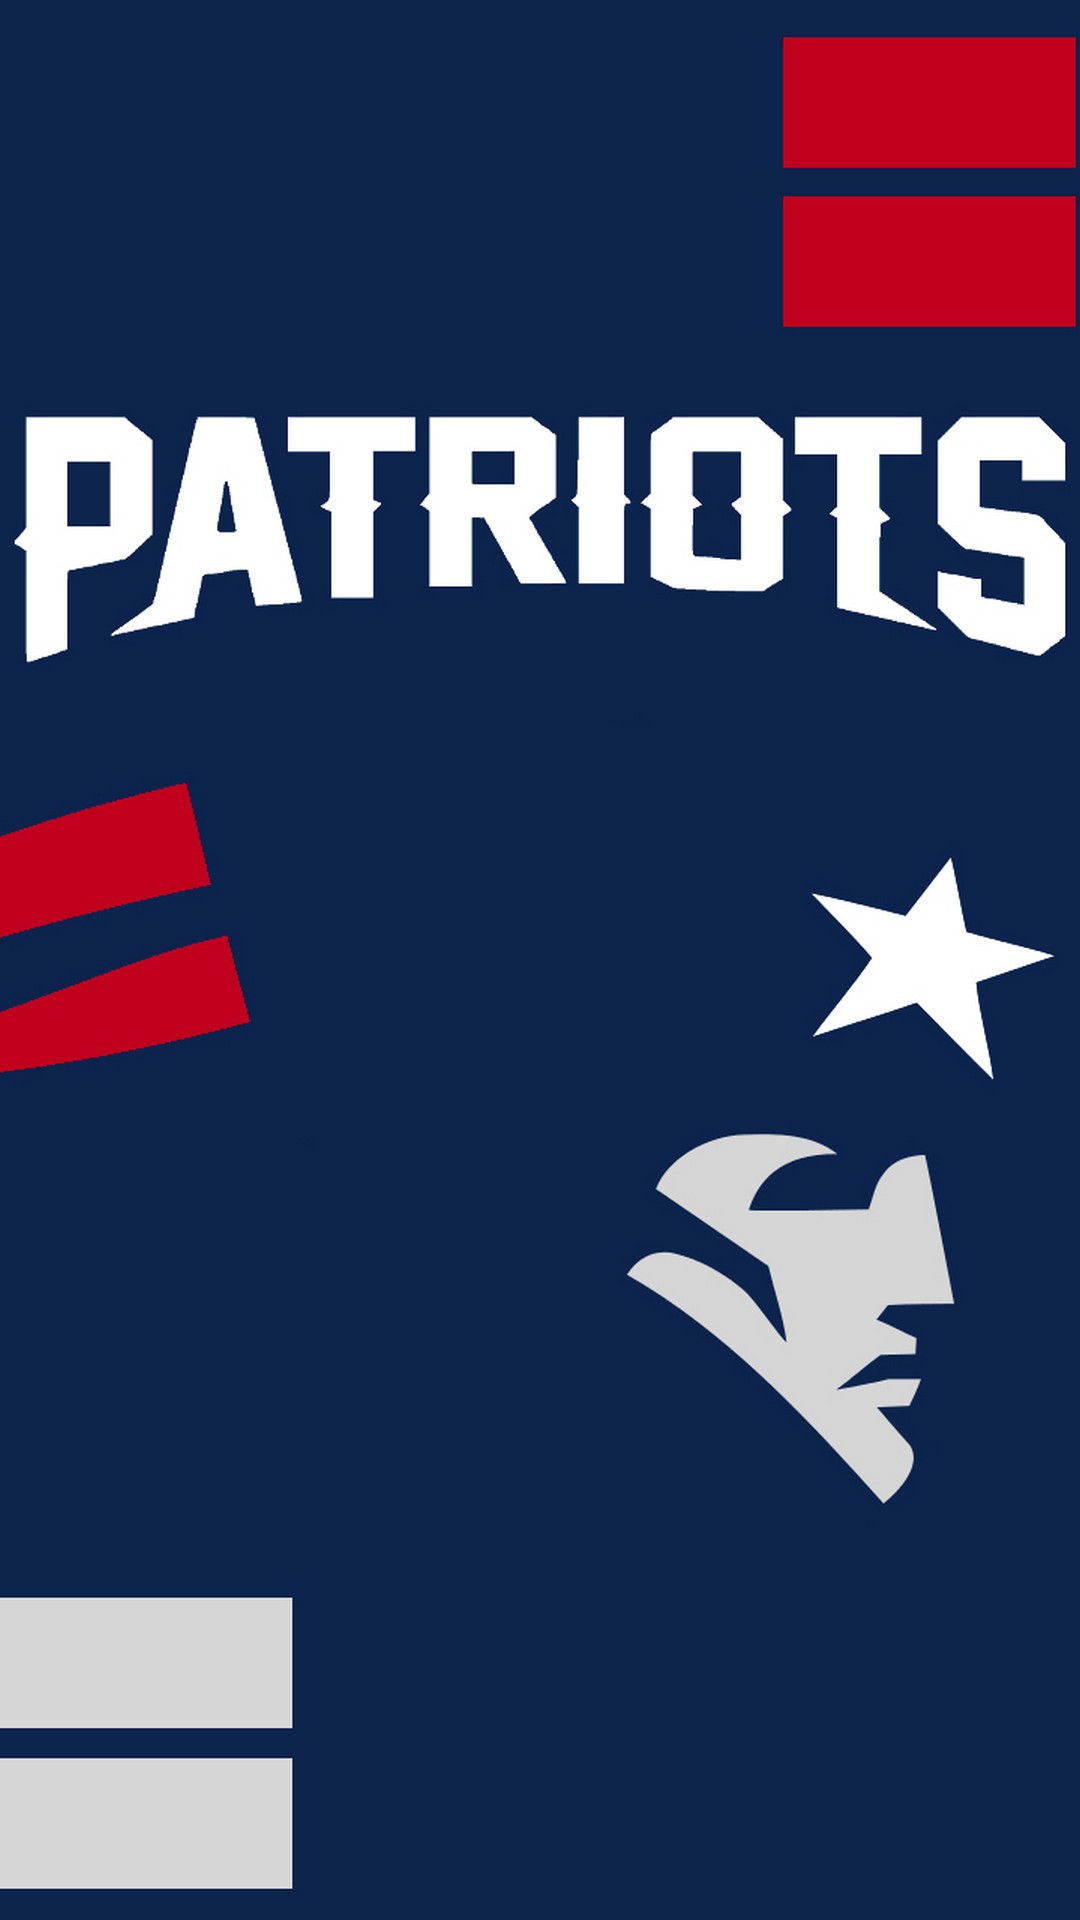 New England Patriots iPhone Wallpaper in HD with high-resolution 1080x1920 pixel. Download and set as wallpaper for Apple iPhone X, XS Max, XR, 8, 7, 6, SE, iPad, Android